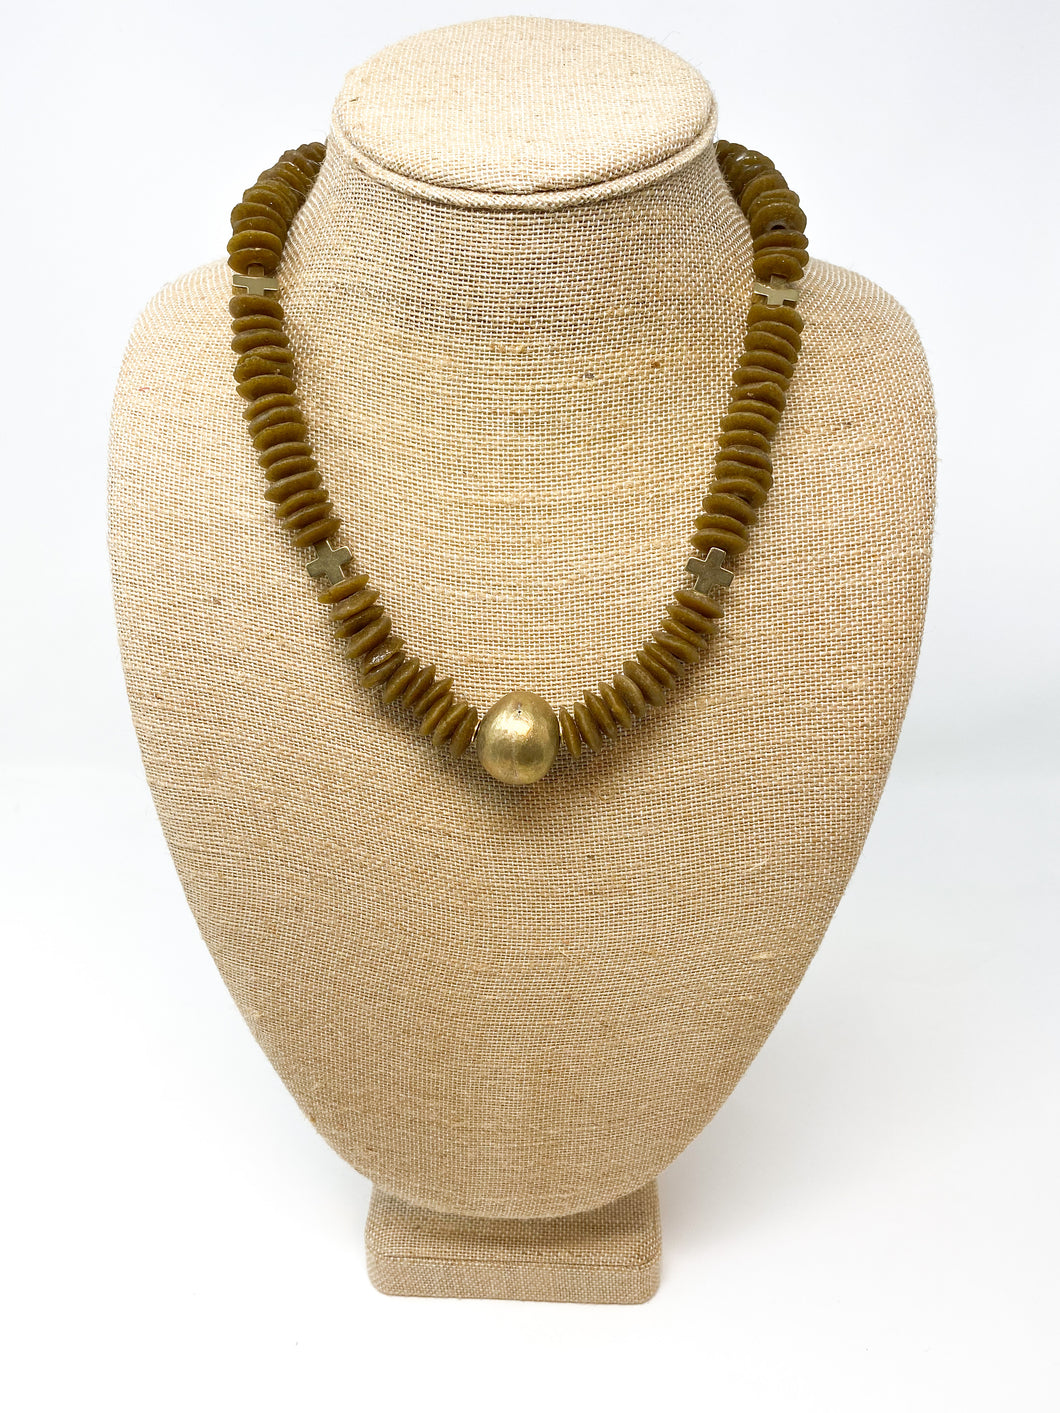 Taber African Glass Necklace | Mocha